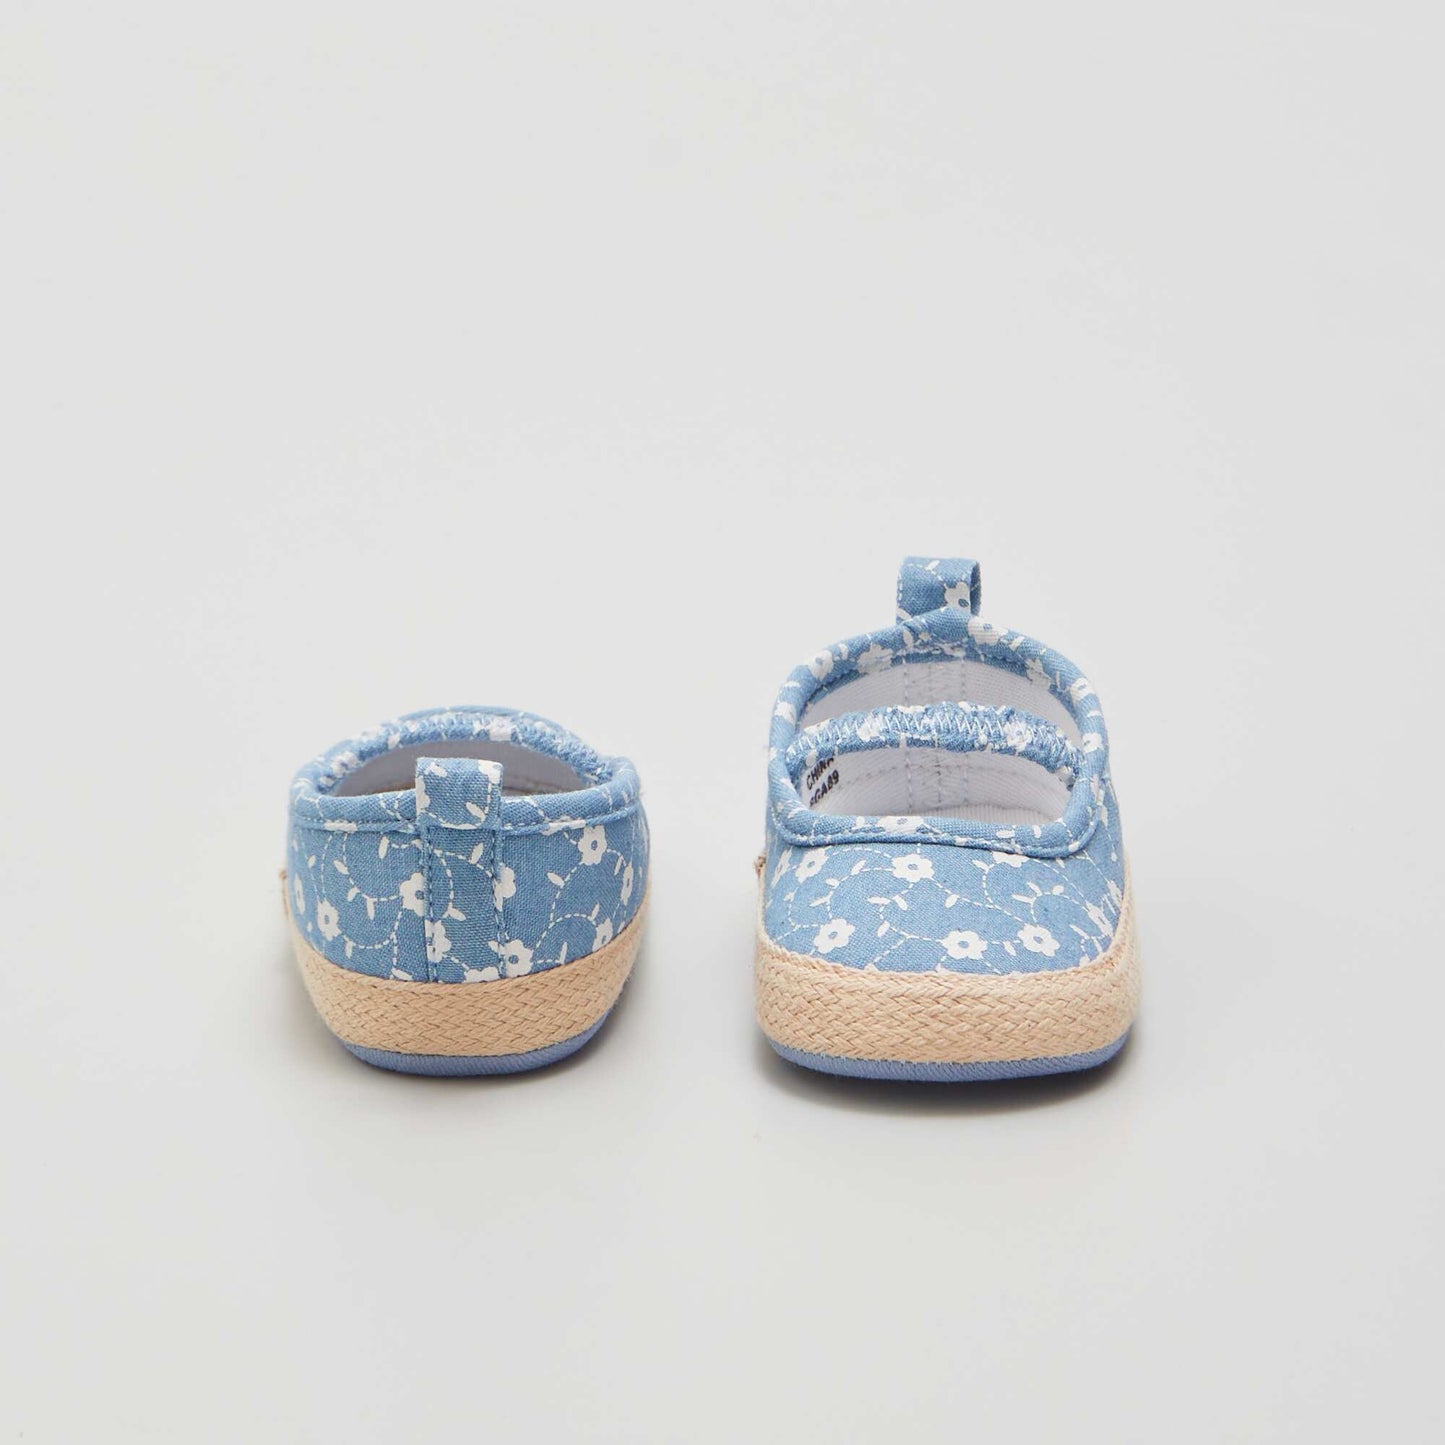 Printed espadrille-style sandals BLUE